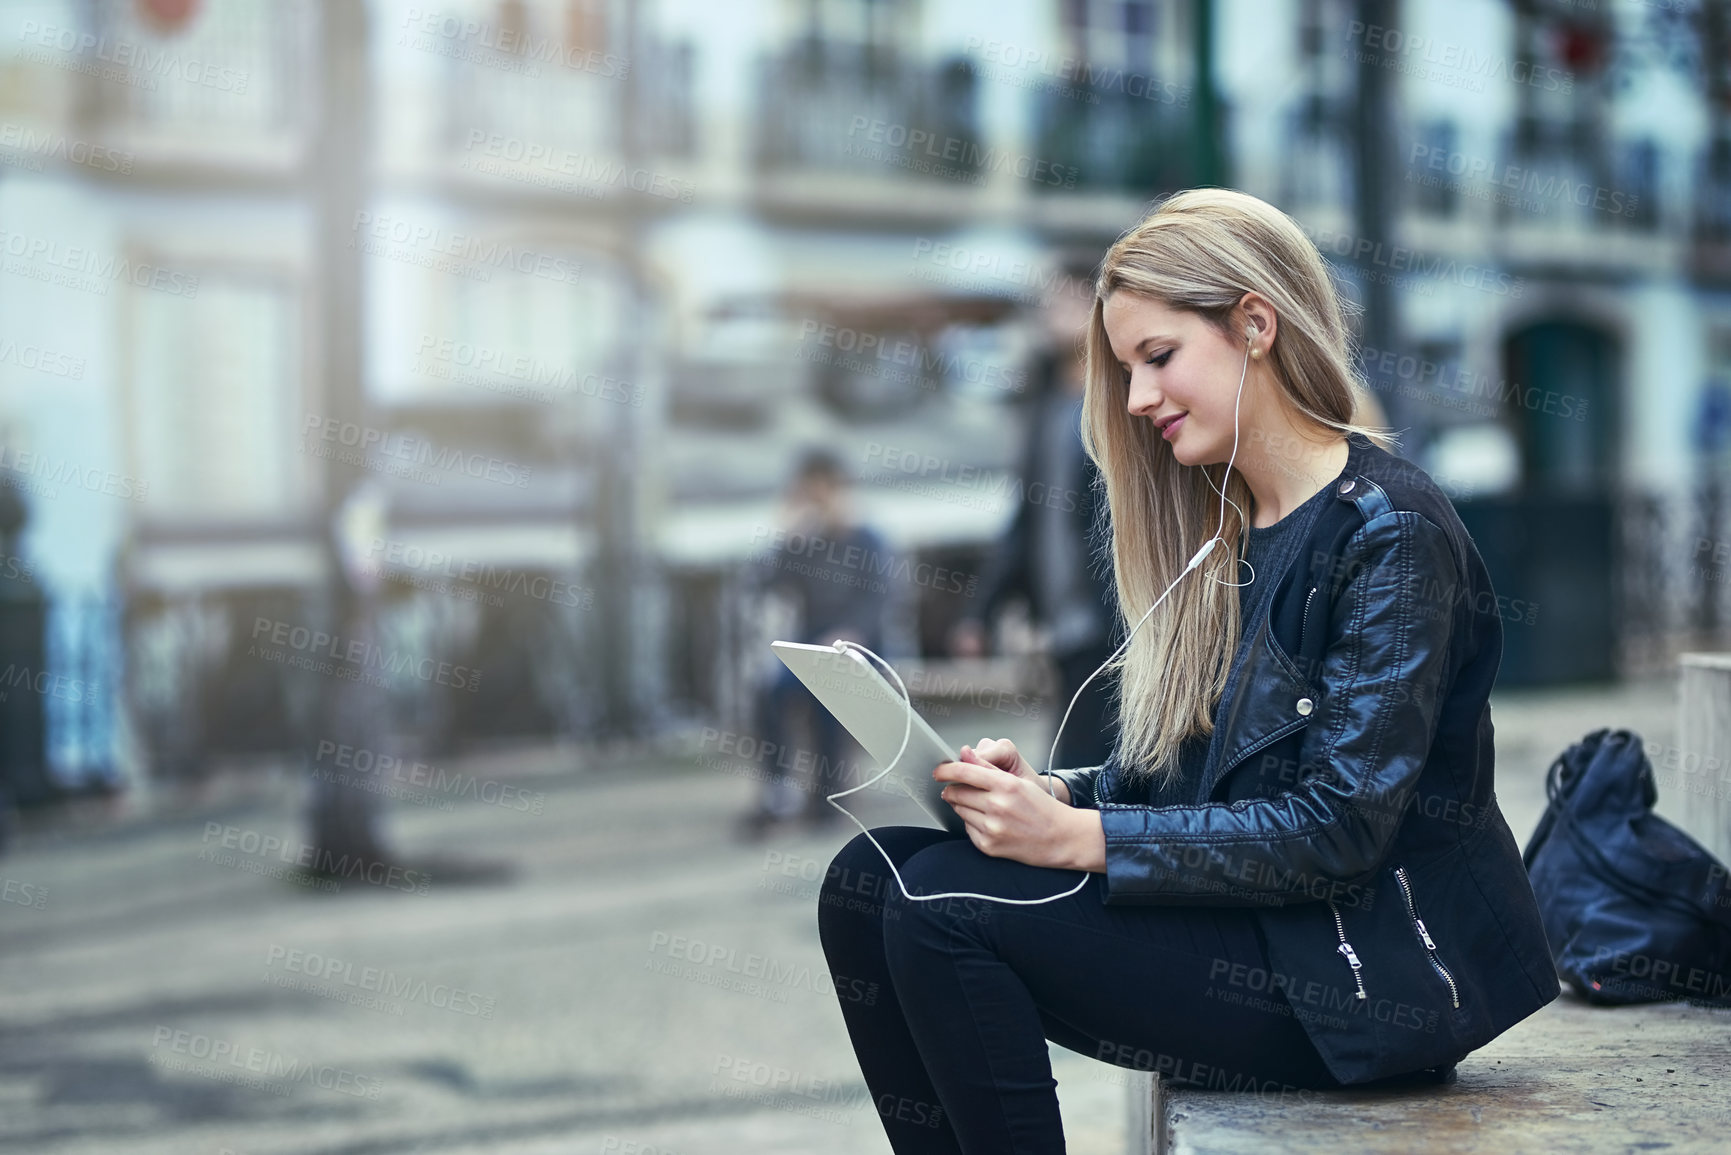 Buy stock photo Shot of an attractive woman using a digital tablet and earphones in the city